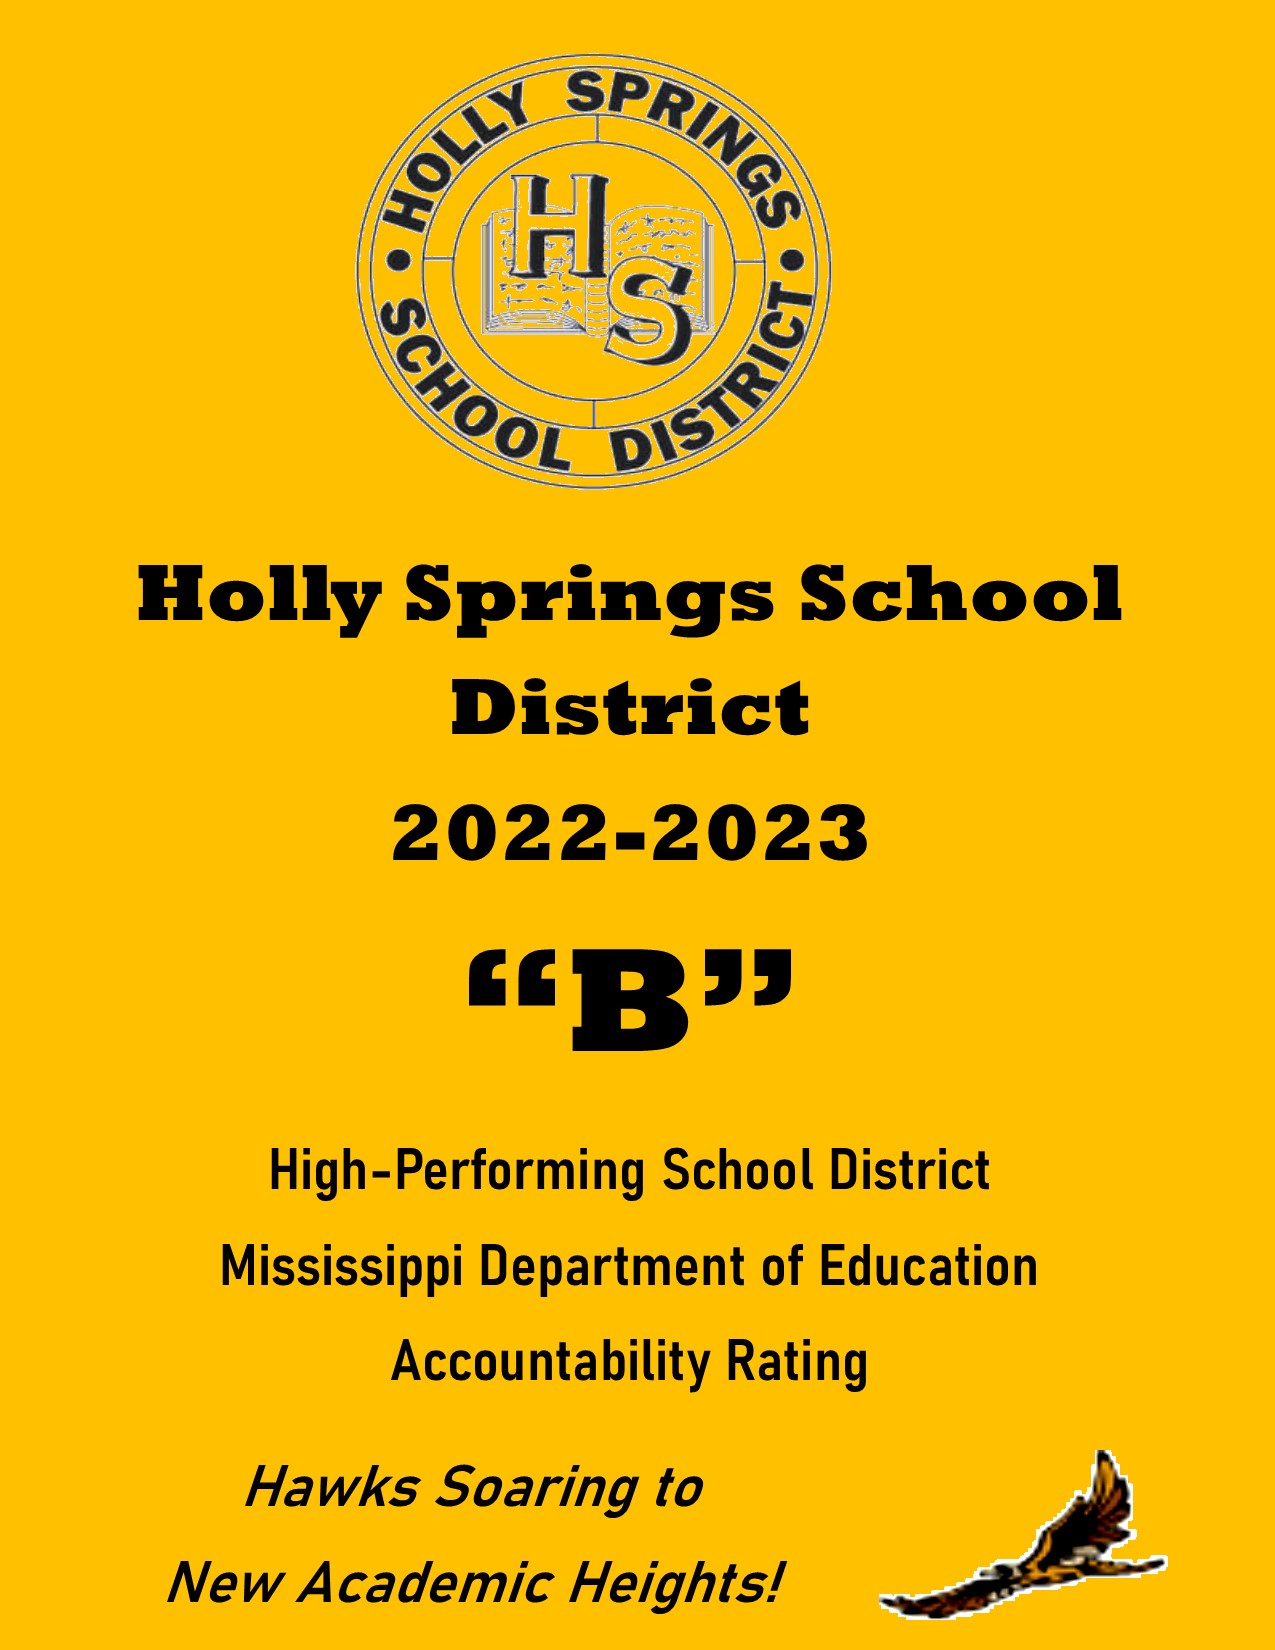 High-Performing District